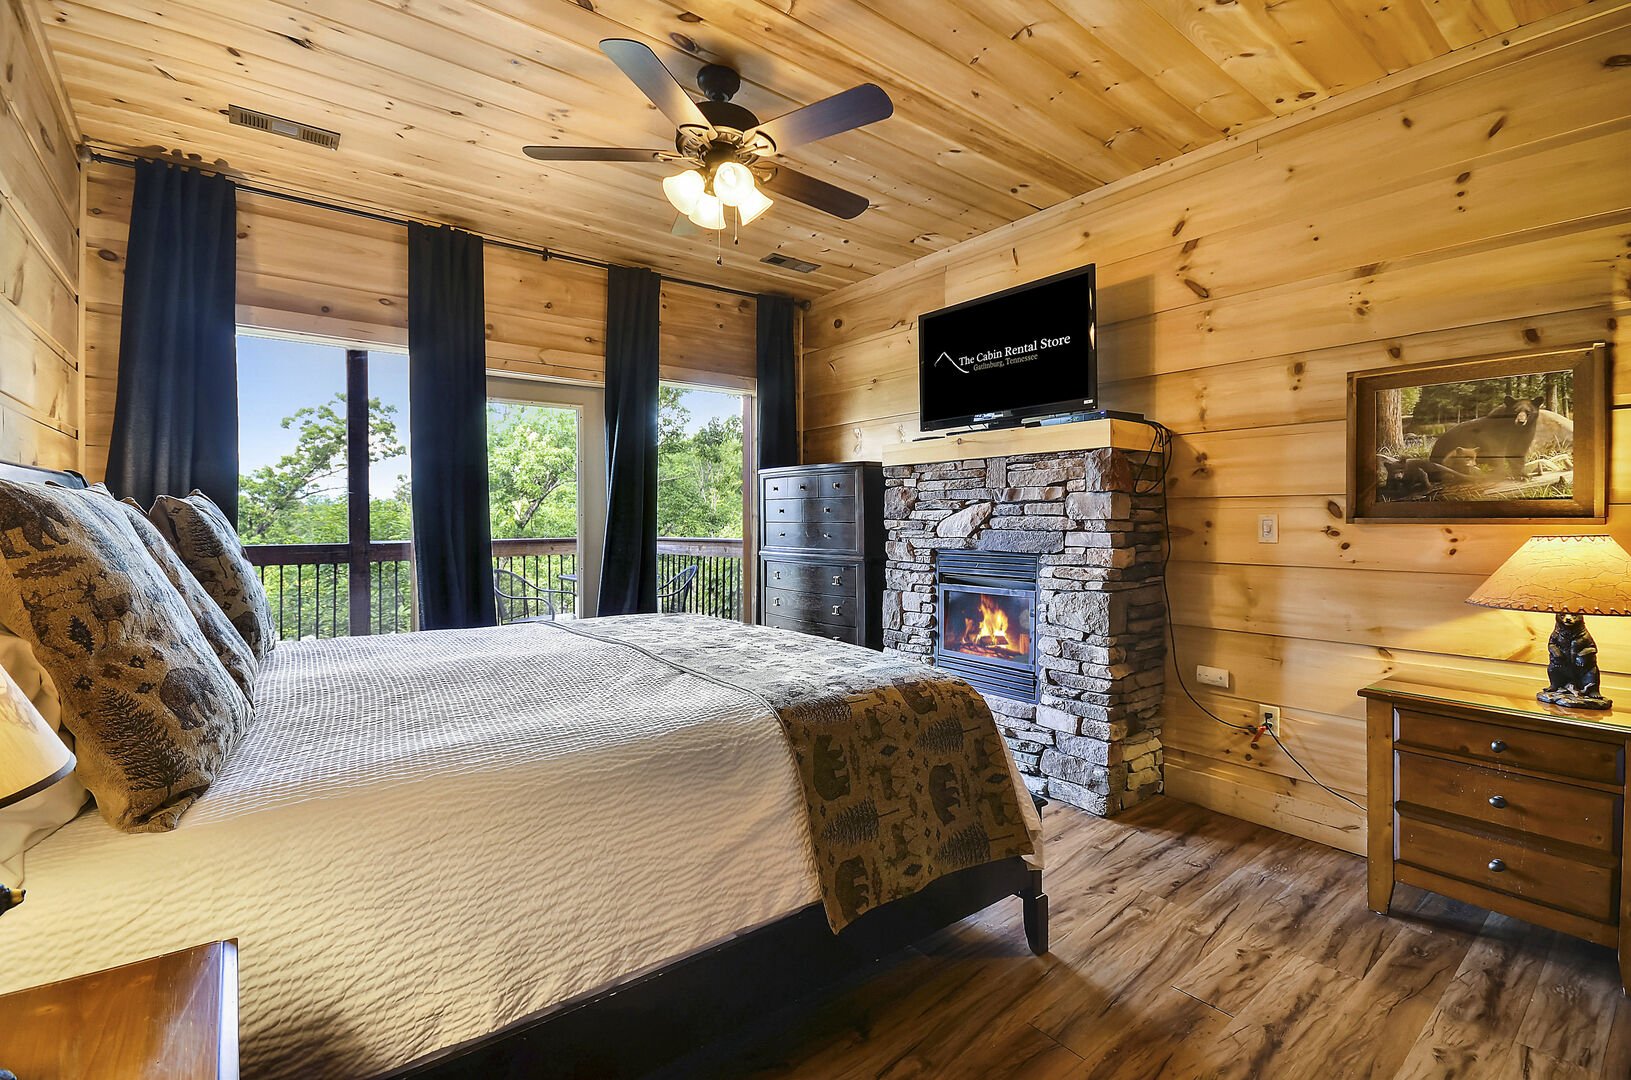 Image of Bed, TV, and Fireplace in Bedroom.